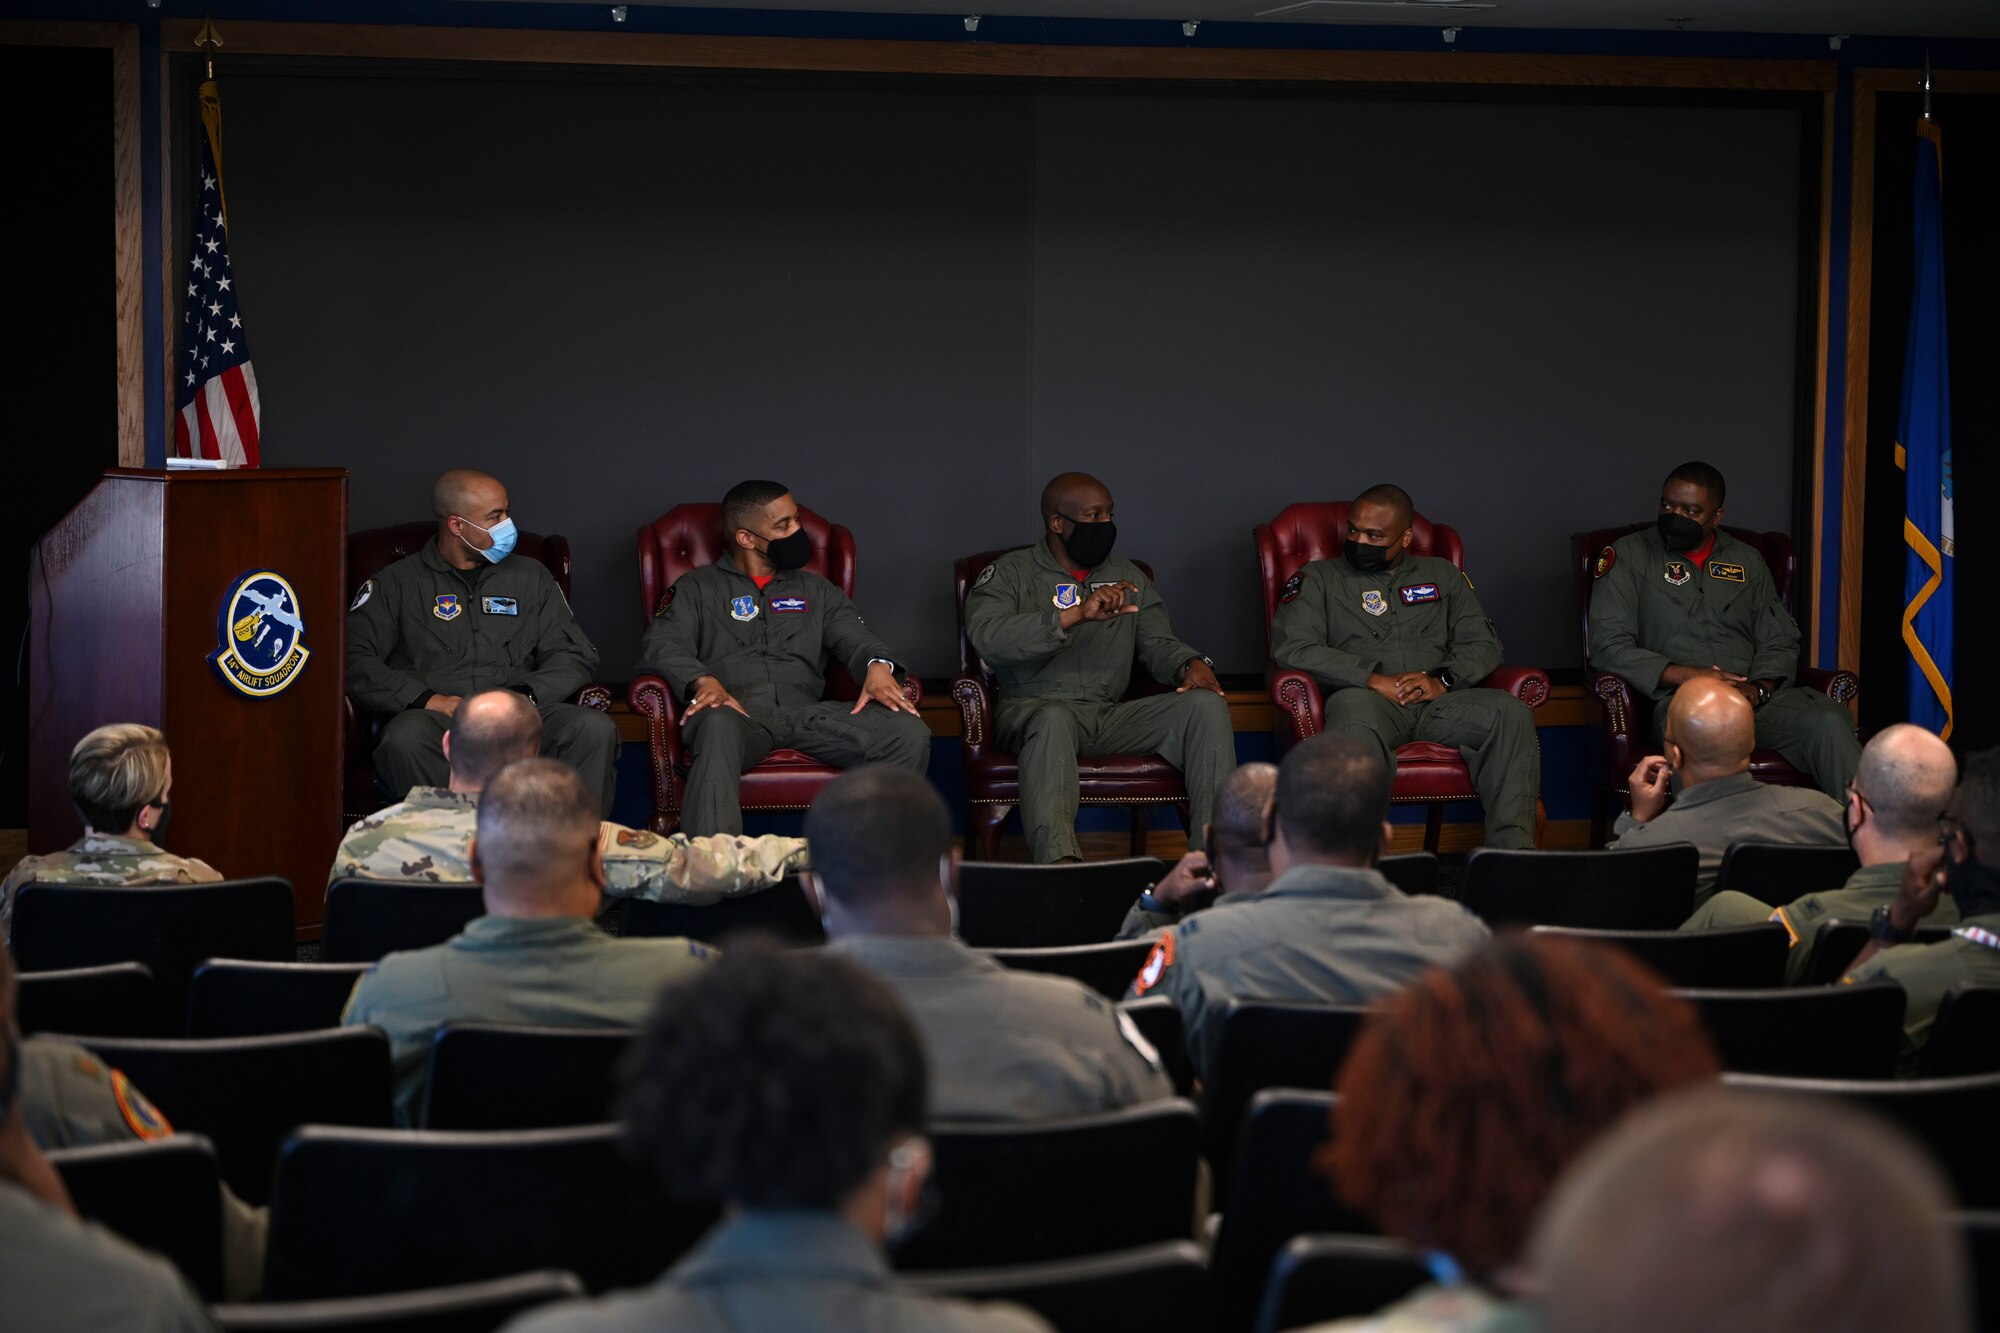 U.S. Air Force Lt. Col Aaron Jones, 49th Flying Training Squadron commander, speaks during an Officer Aviation Professional Development panel, Feb. 18, 2022, on Joint Base Charleston, South Carolina. Jones, along with other commanders, shared their career experiences and answered questions from curious attendees. (U.S Air Force photo by Airman 1st Class Jessica Haynie)